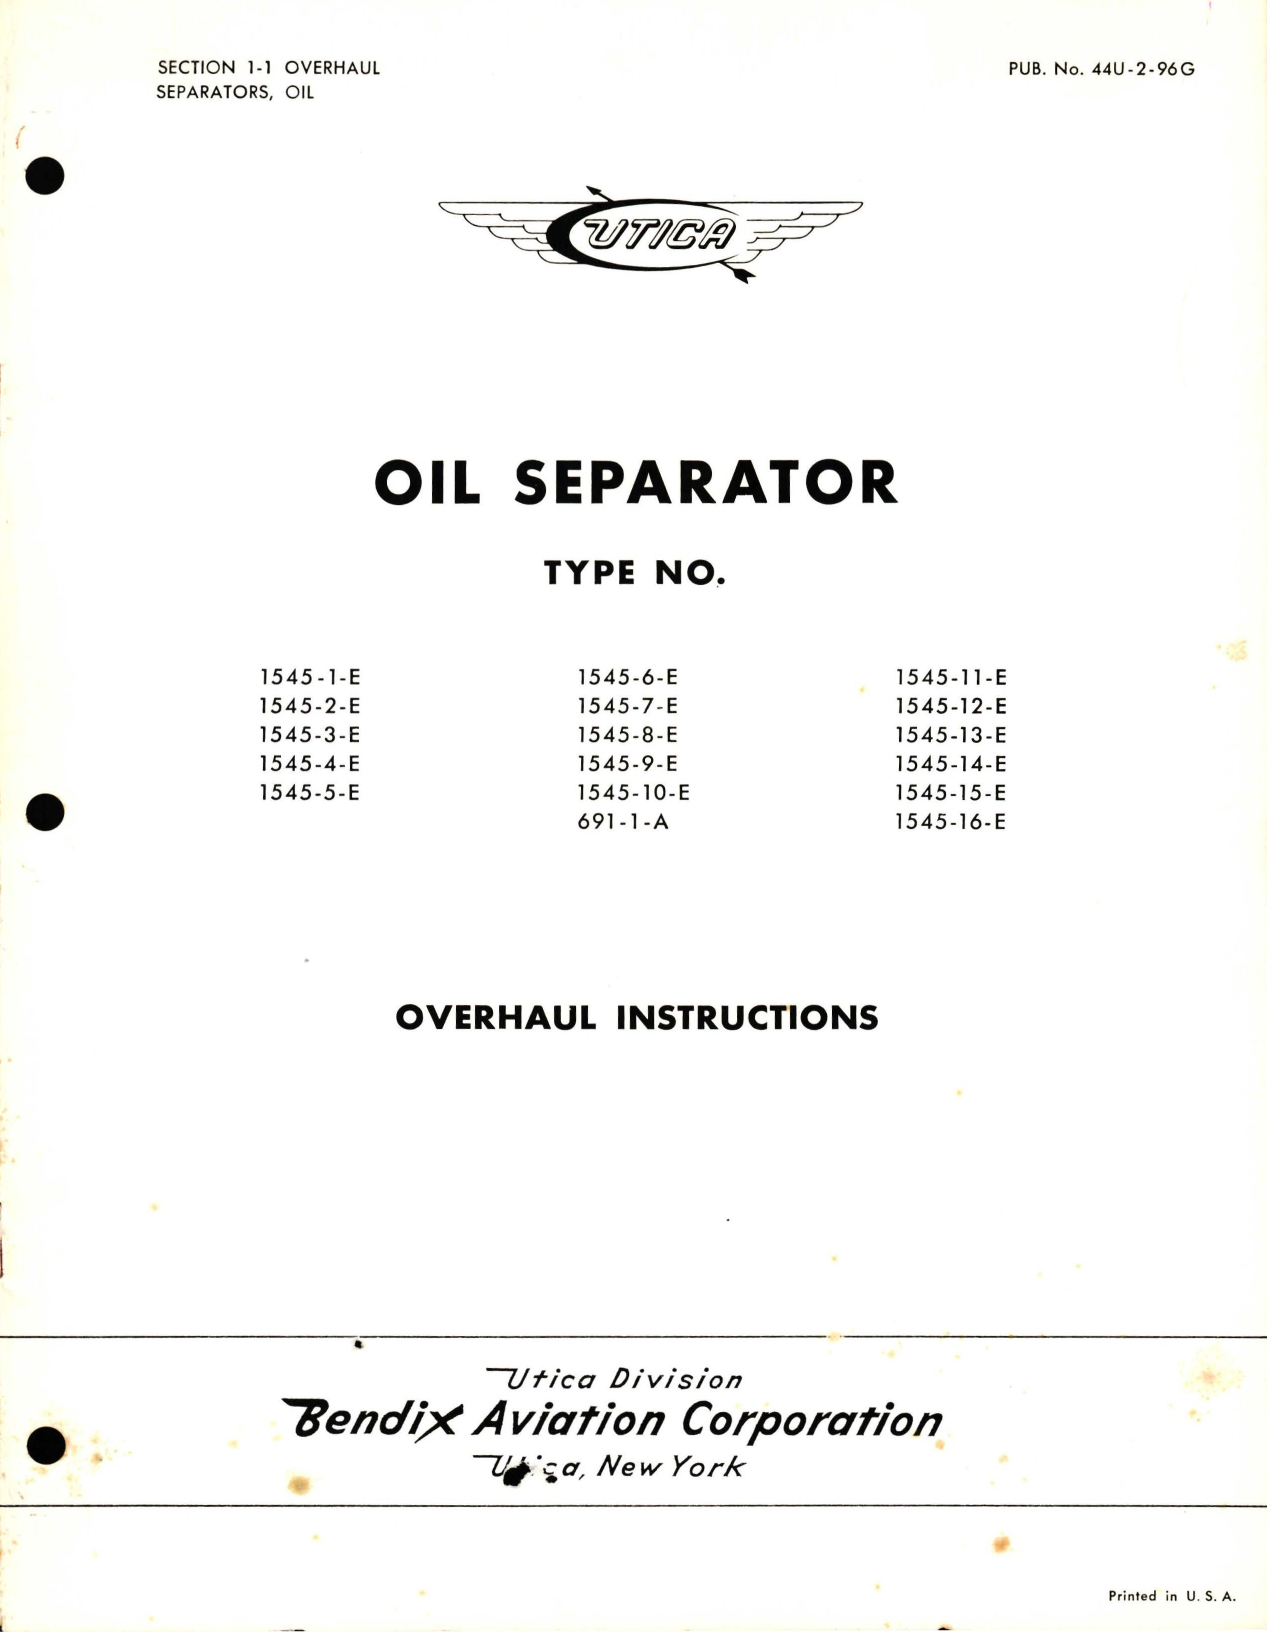 Sample page 1 from AirCorps Library document: Overhaul Instructions for Oil Separator - Section 1-1